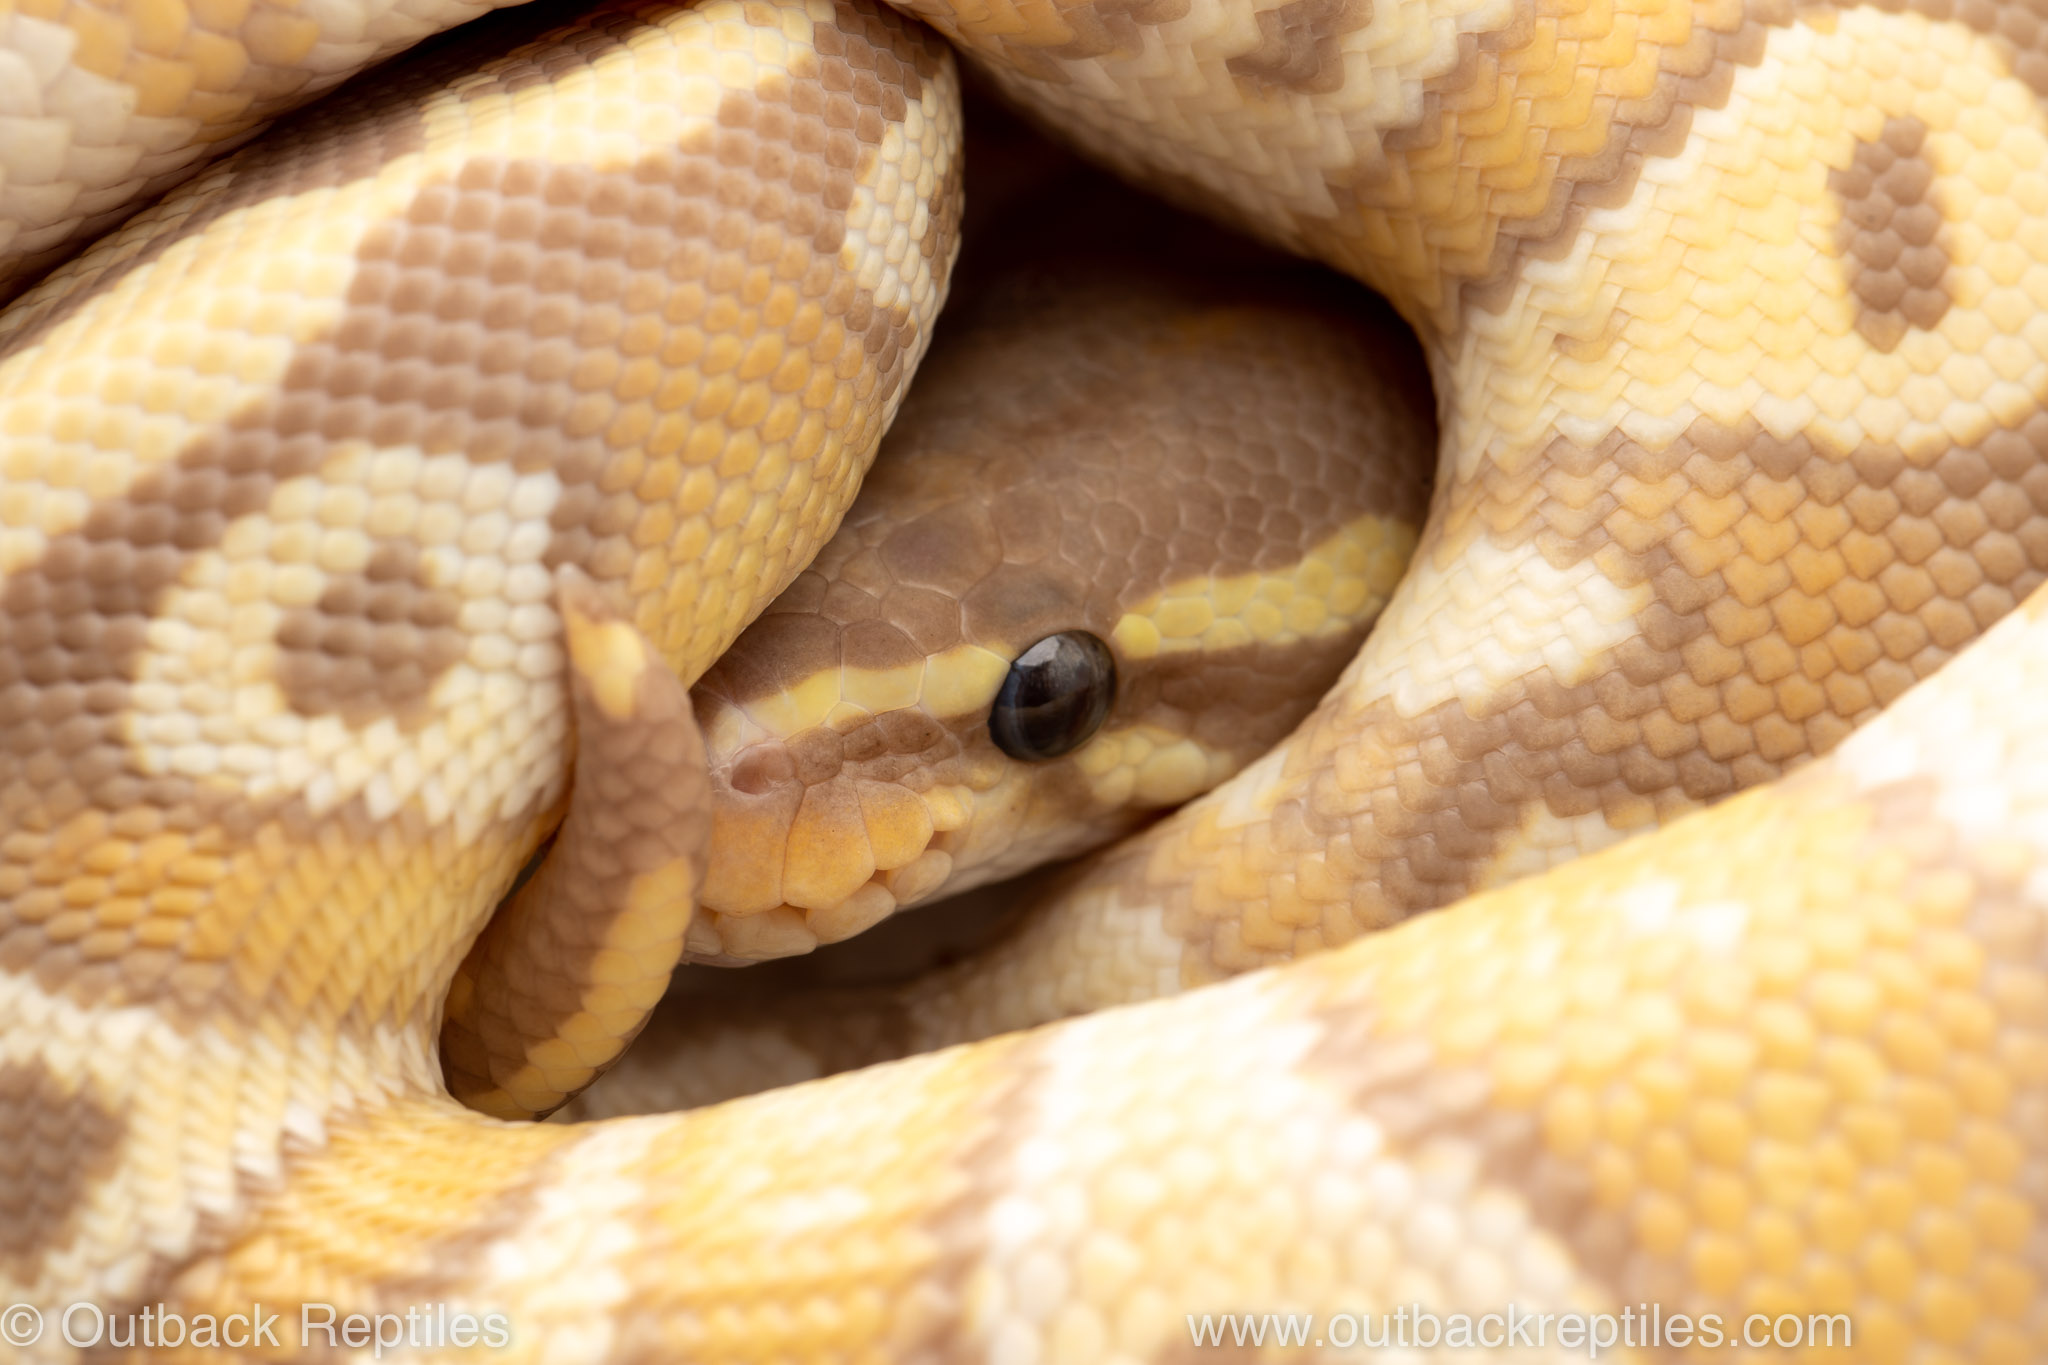 Ball Python Care Guide: Everything You Need to Know